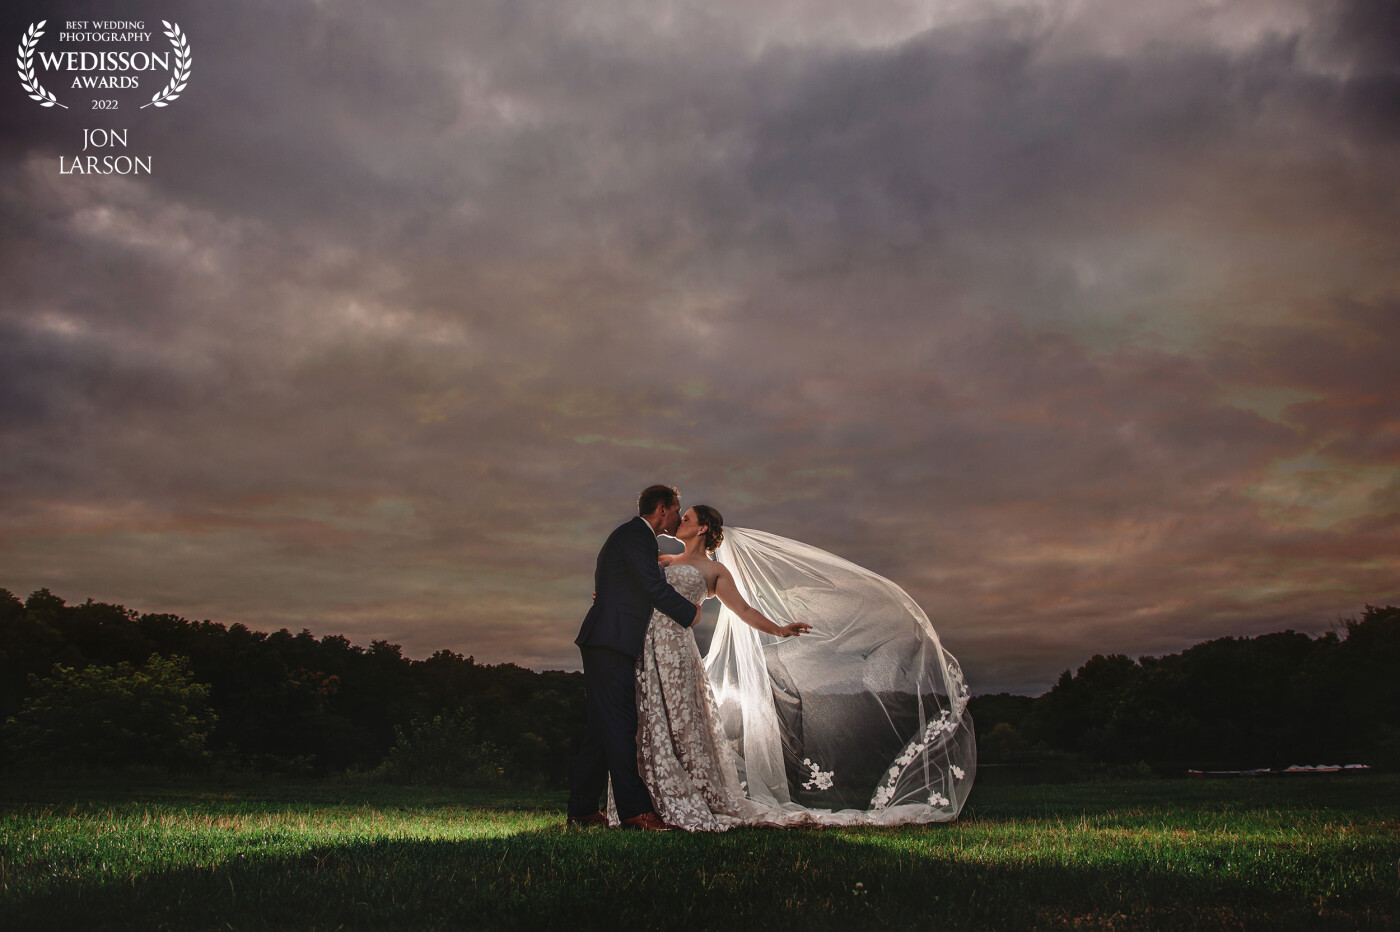 The sky was very ominous looking and the sun was fading fast! Grabbing the newlyweds I was able to create for them under another masterpiece sky. The brides veil was absolutely beautiful and had to be a part of this shot.